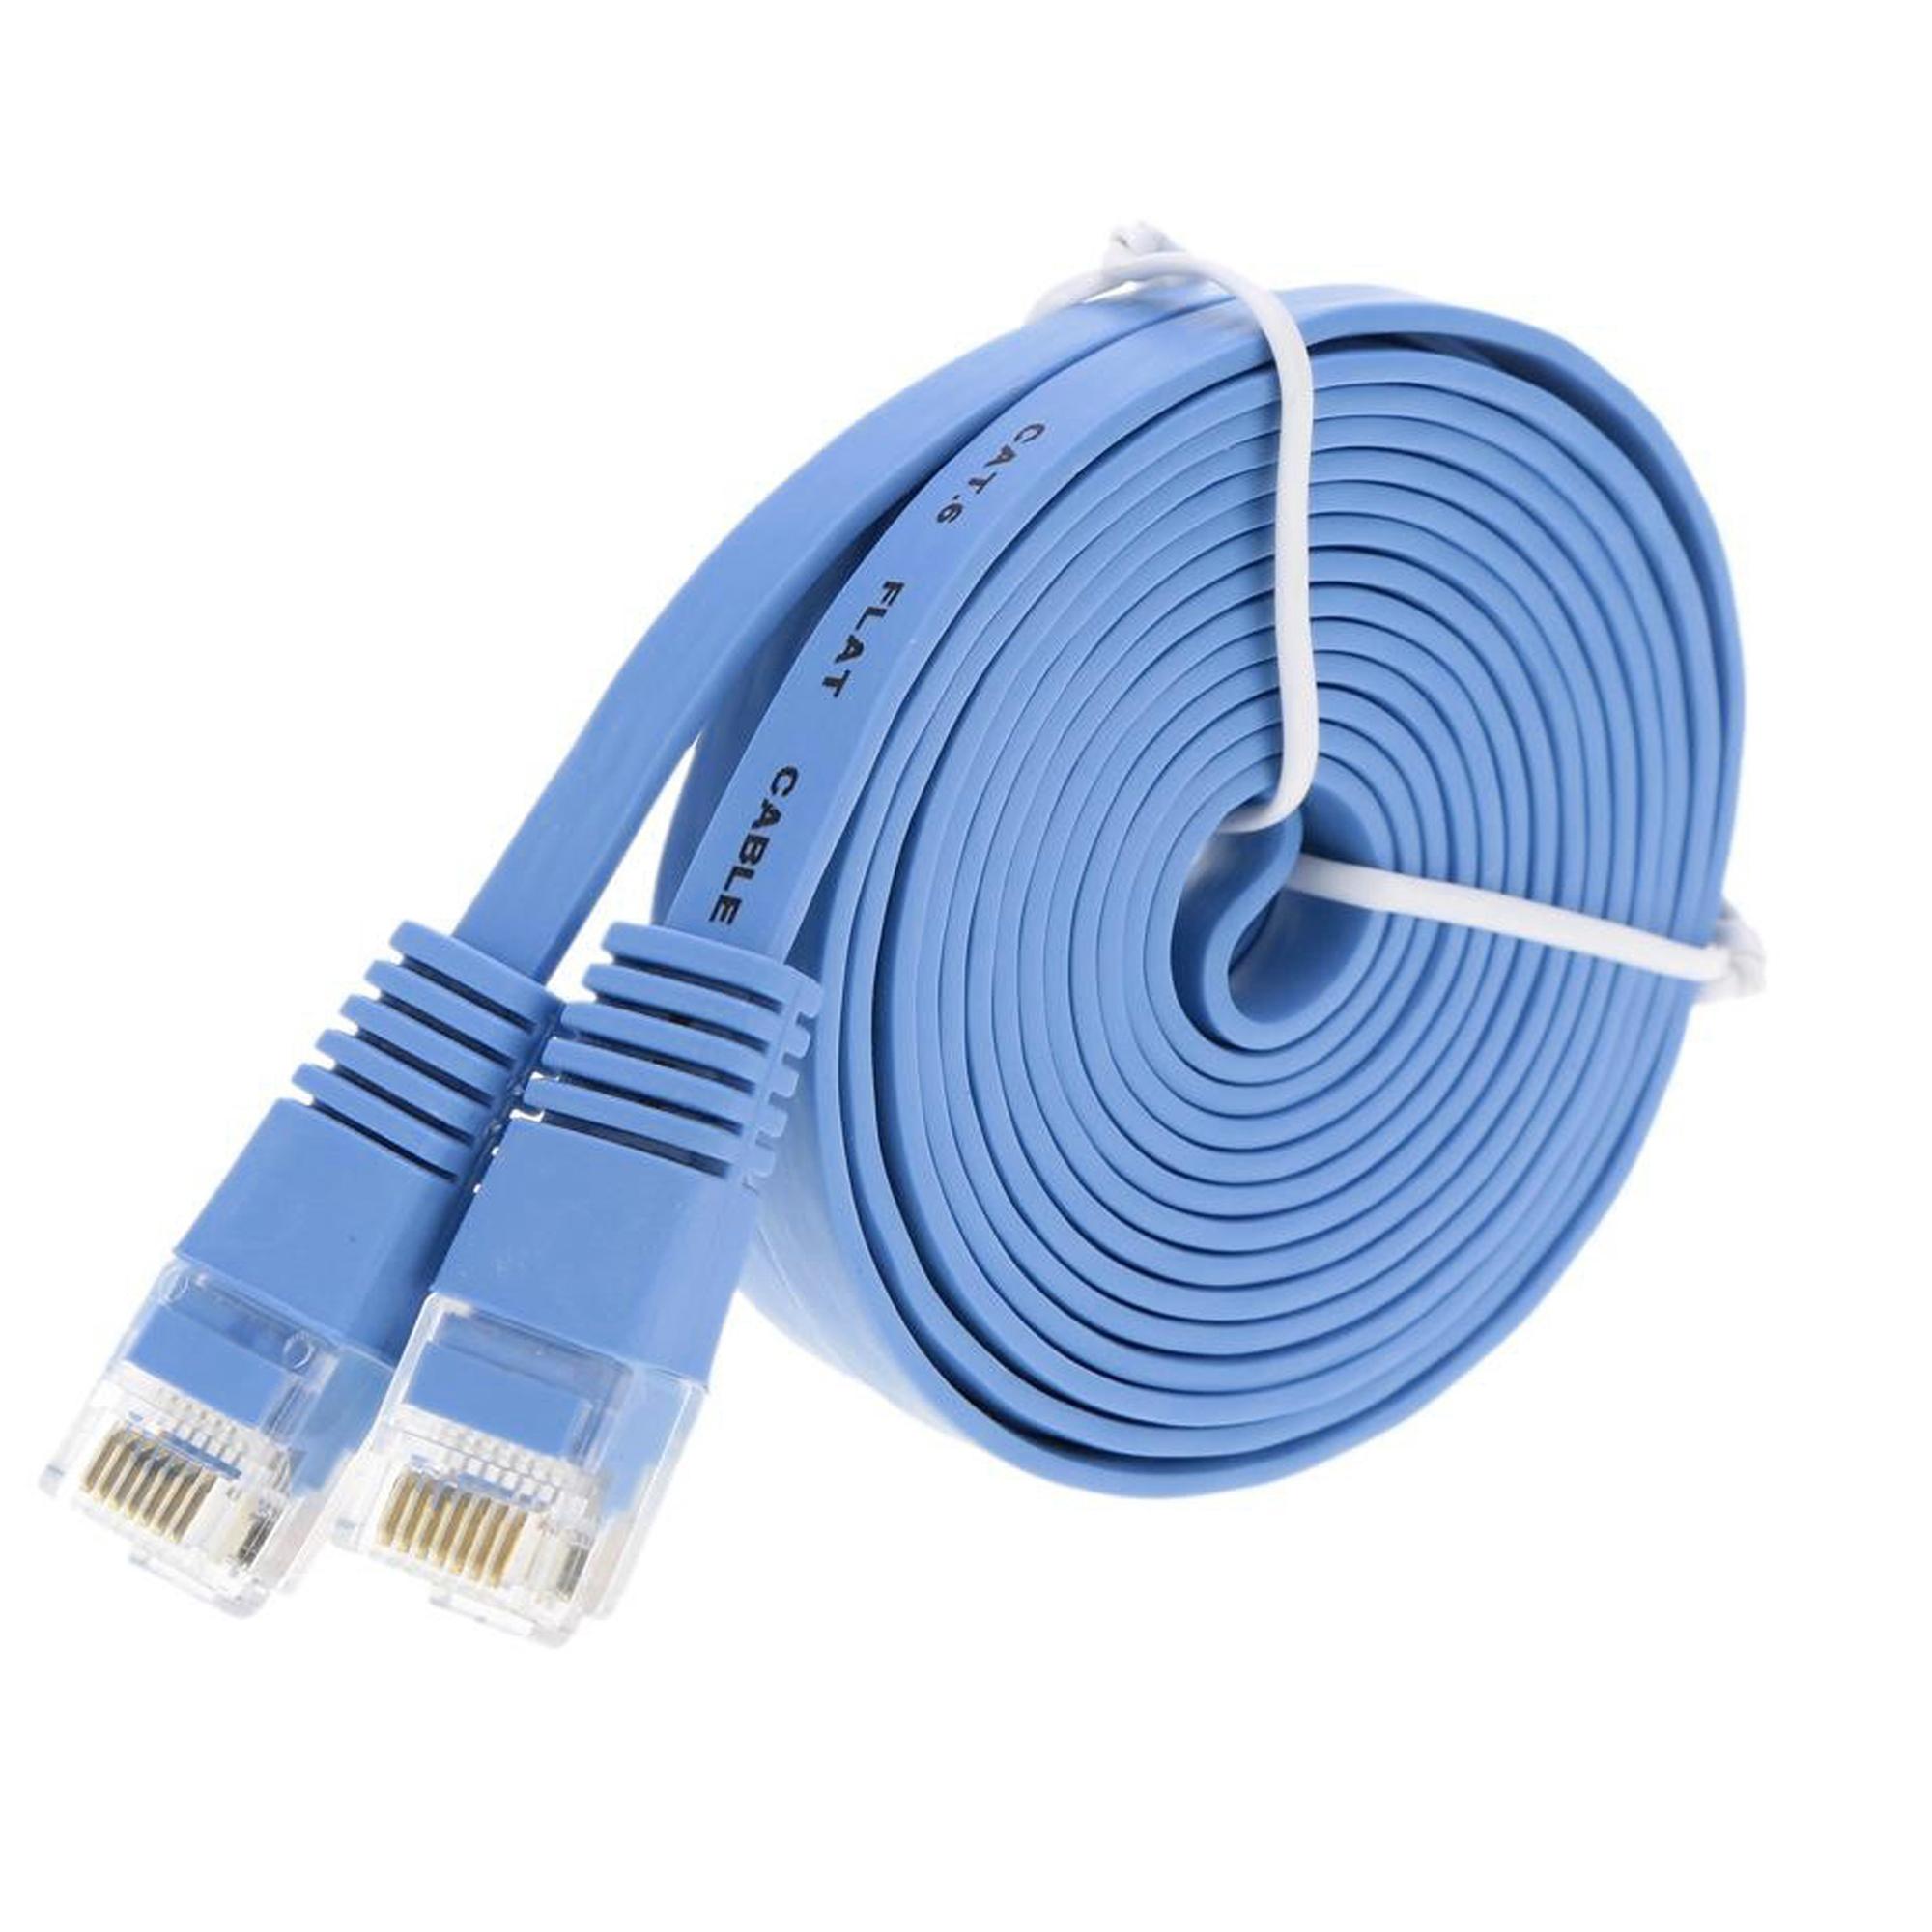 modem Knowooh Lan cable raw cable network cable patch cable flat network cable for router patch panel etc. 10M